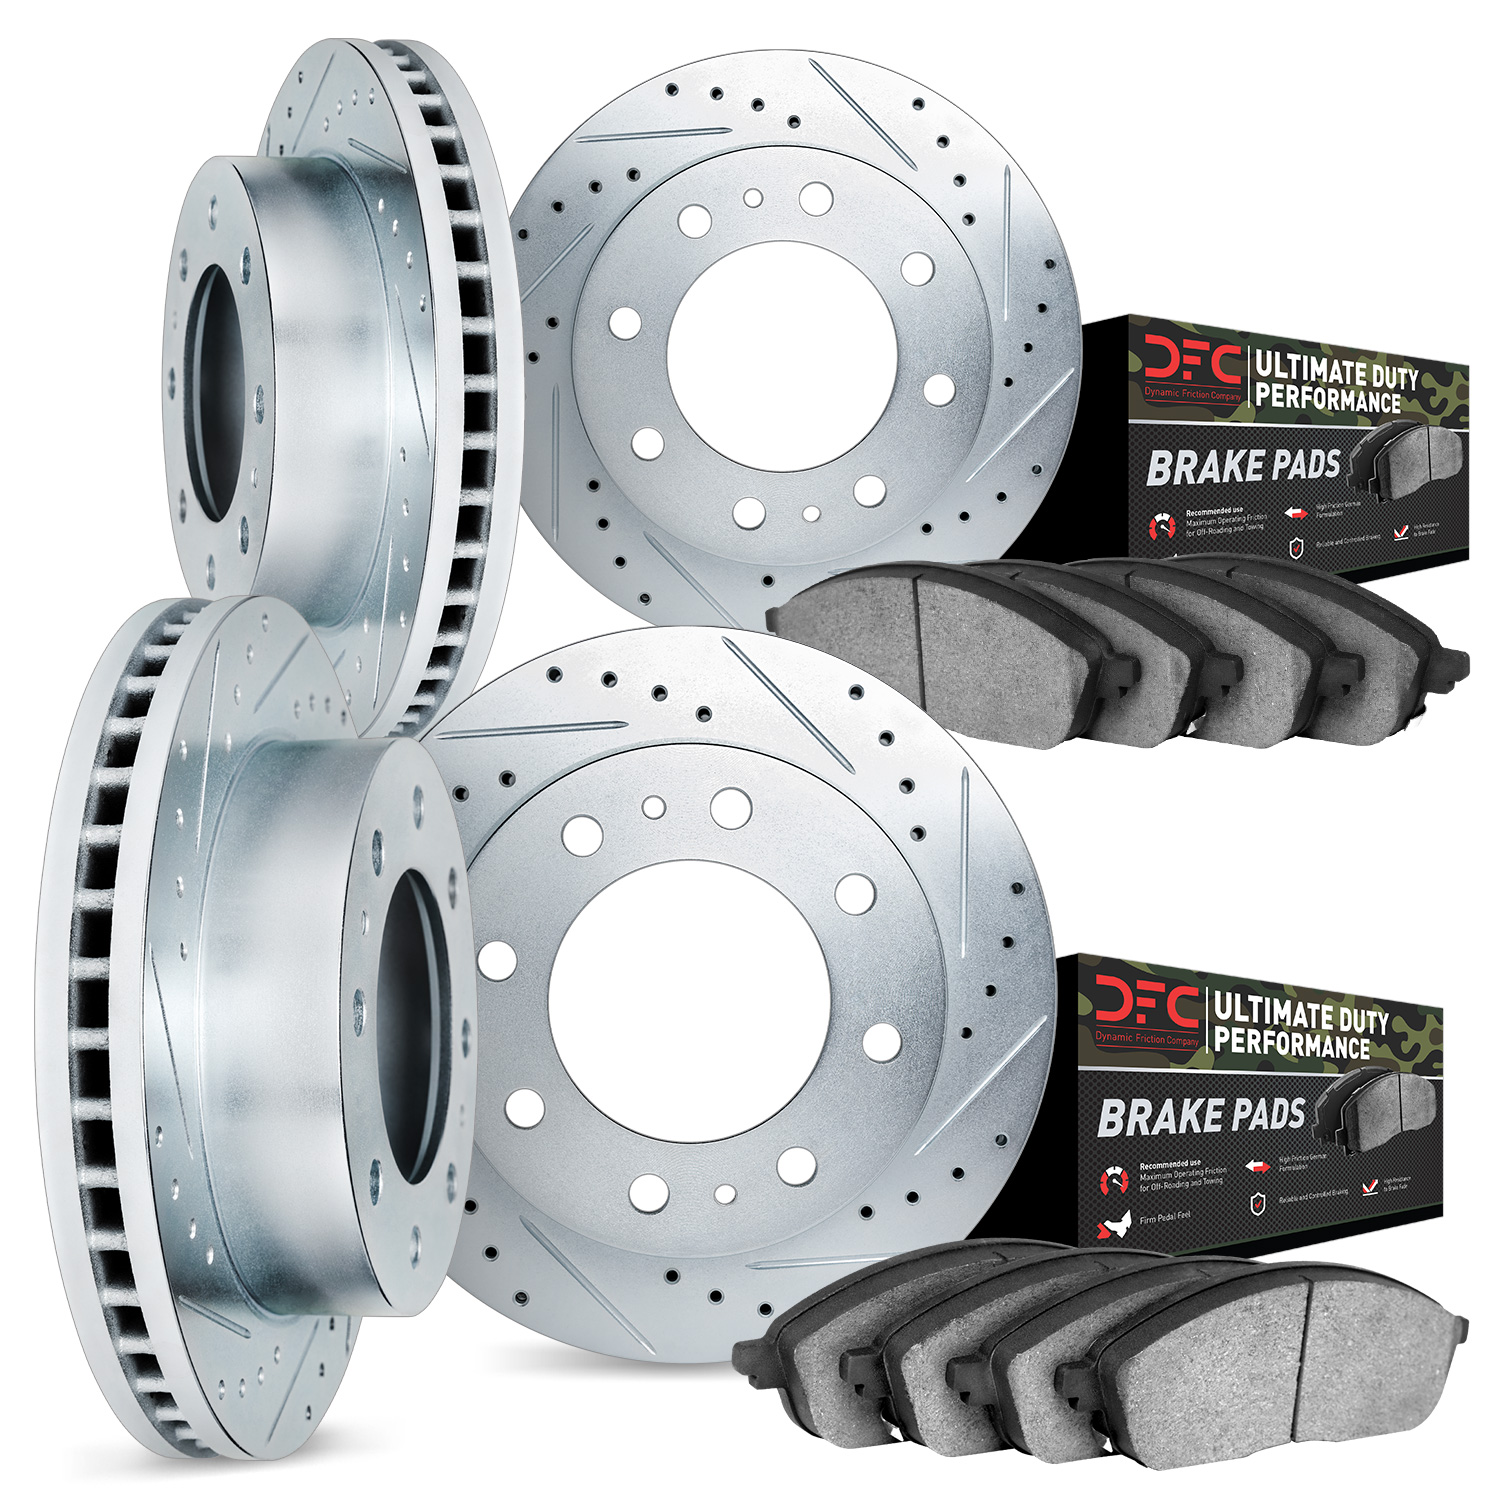 7404-54039 Drilled/Slotted Brake Rotors with Ultimate-Duty Brake Pads Kit [Silver], 2006-2010 Ford/Lincoln/Mercury/Mazda, Positi